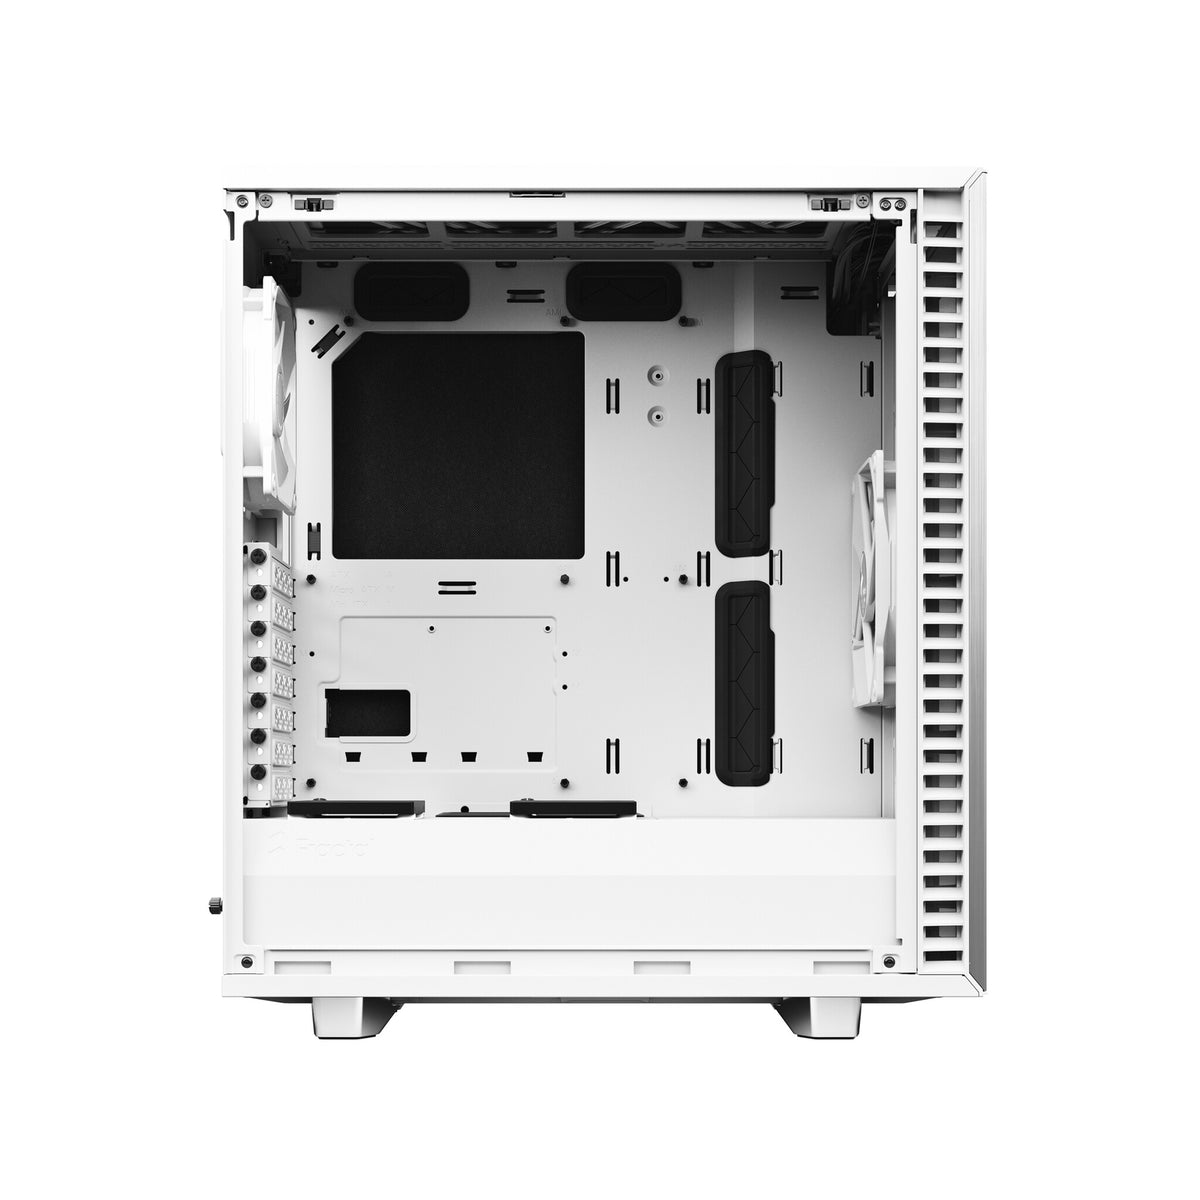 Fractal Design Define 7 Compact - ATX Mid Tower Case in White